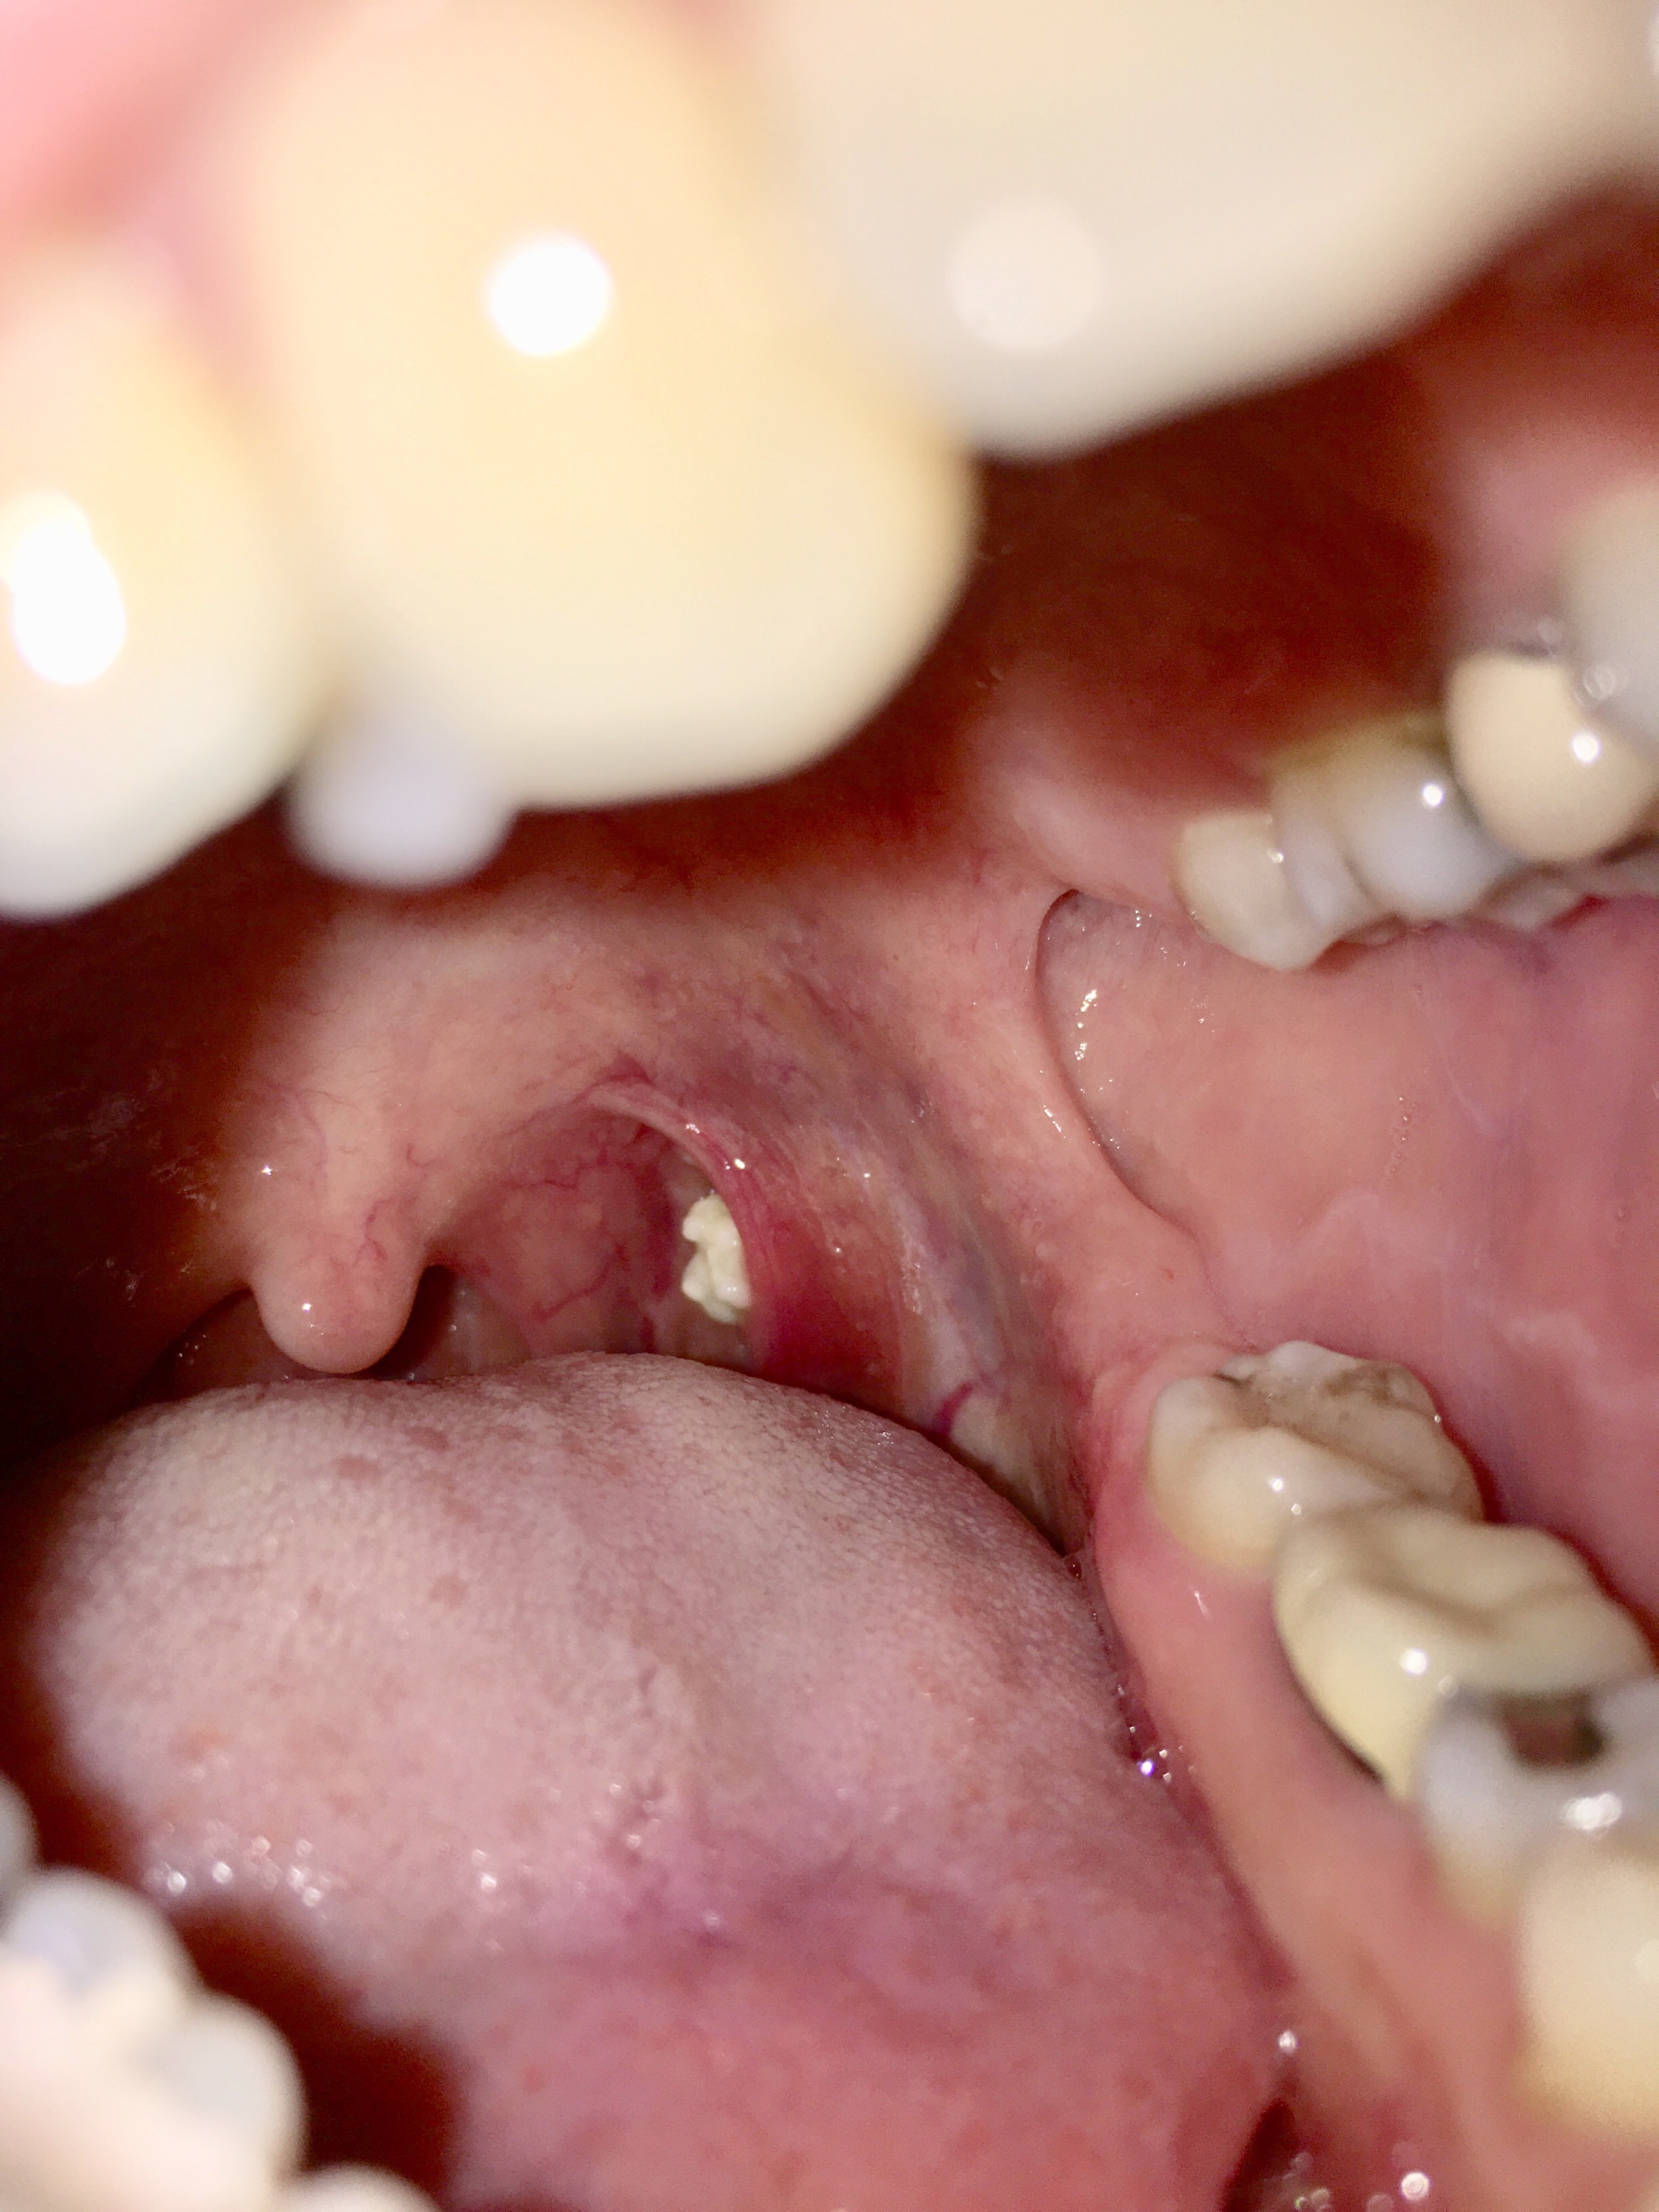 Photograph of the inside of a mouth, with a tonsil stone visible